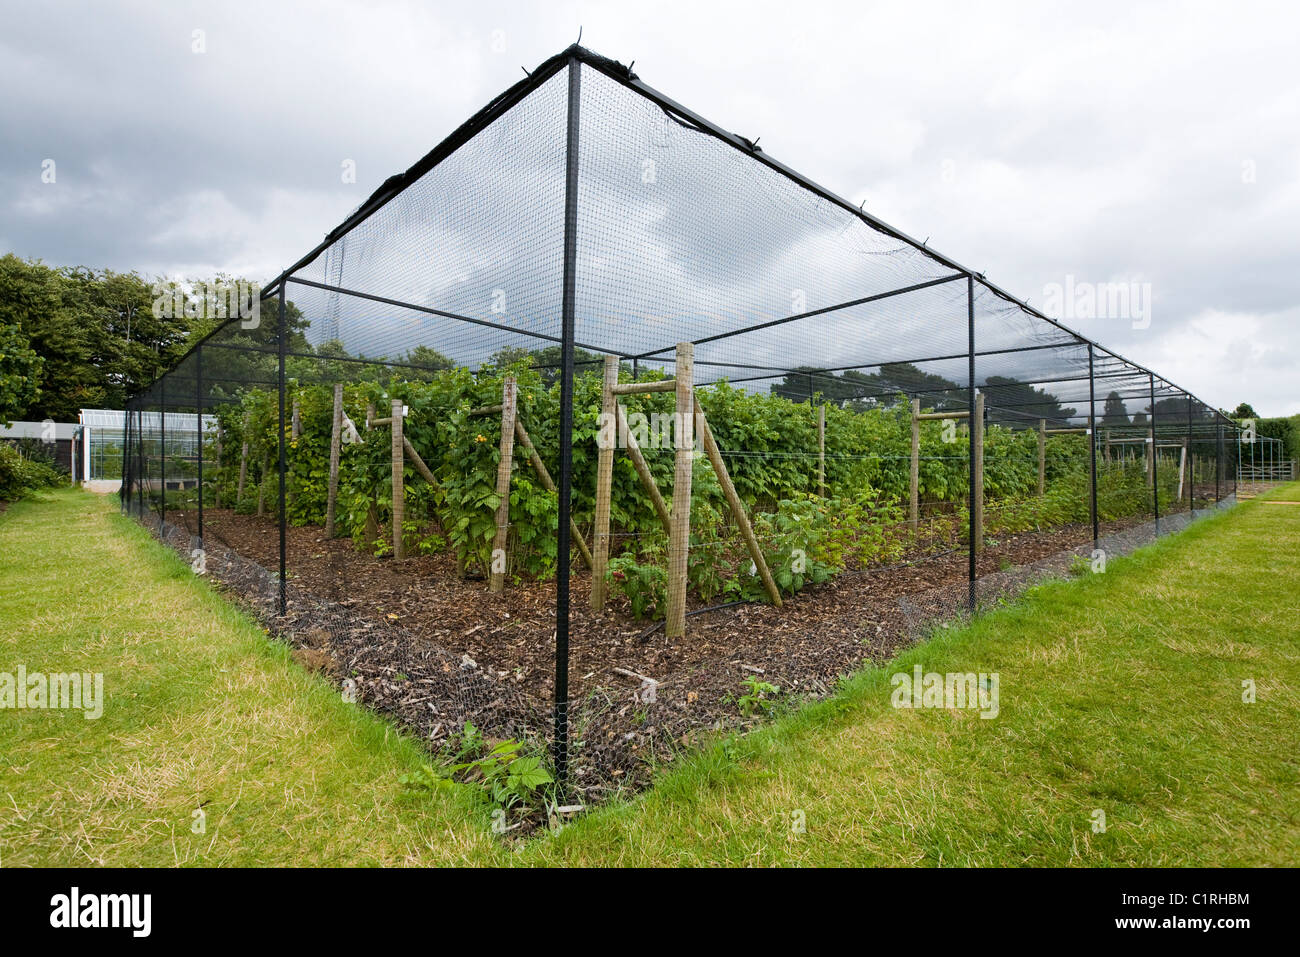 Protection cage around soft fruit trees & bushes. Wisley gardens / RHS / Royal Horticultural Society Headquarters in Surrey. UK. Stock Photo